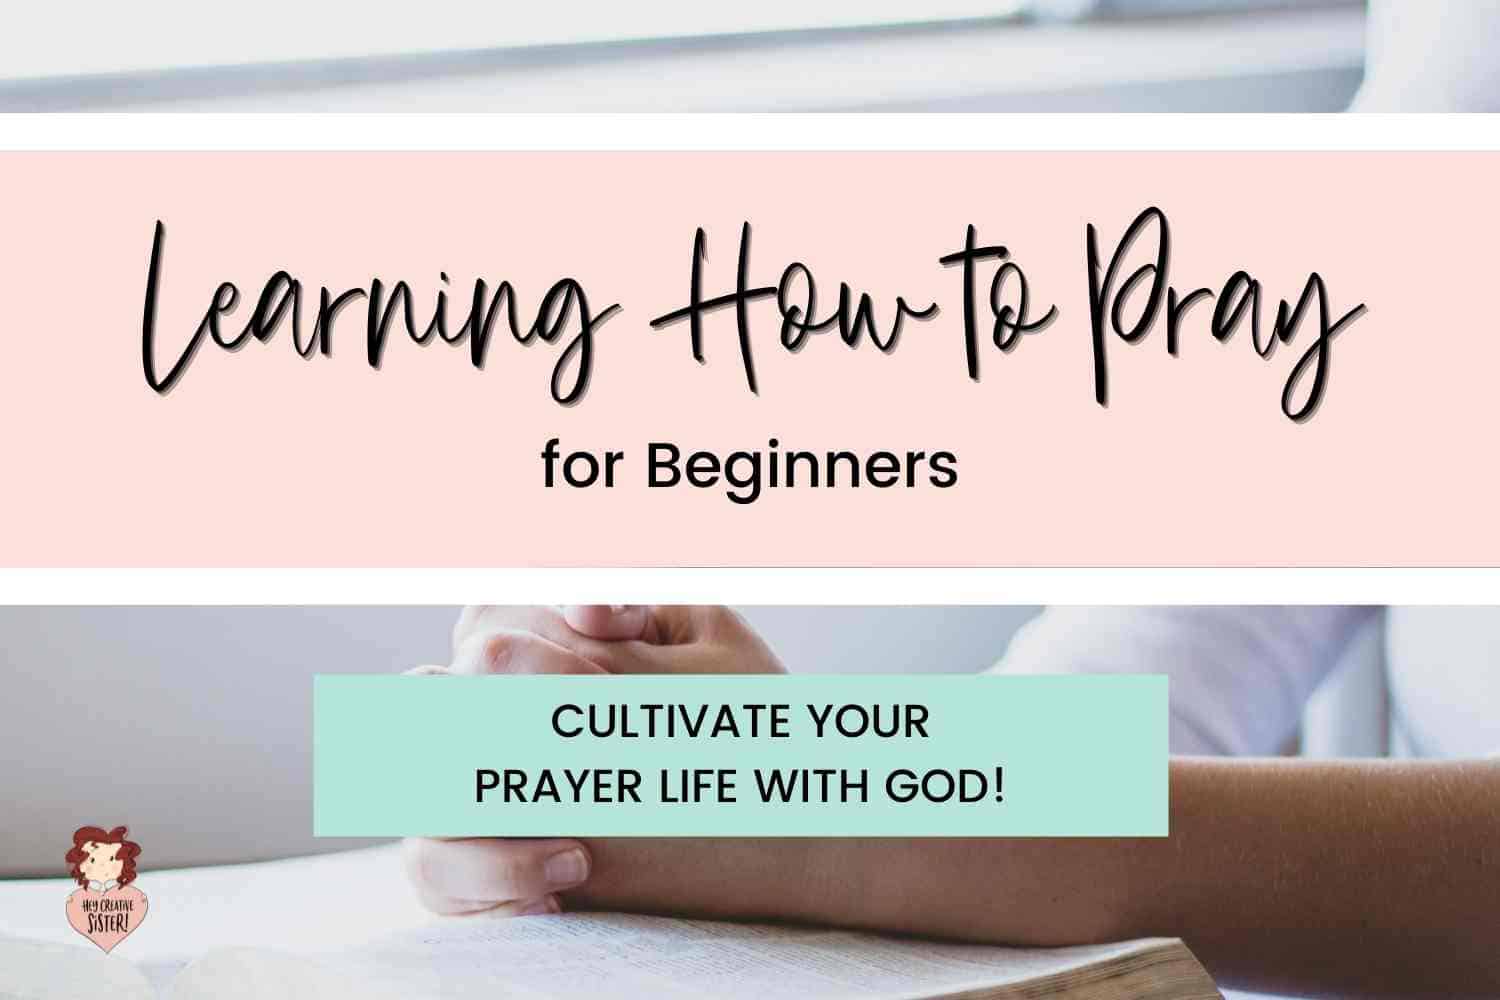 13 Tips for Learning How to Pray for Beginners to Grow in God!